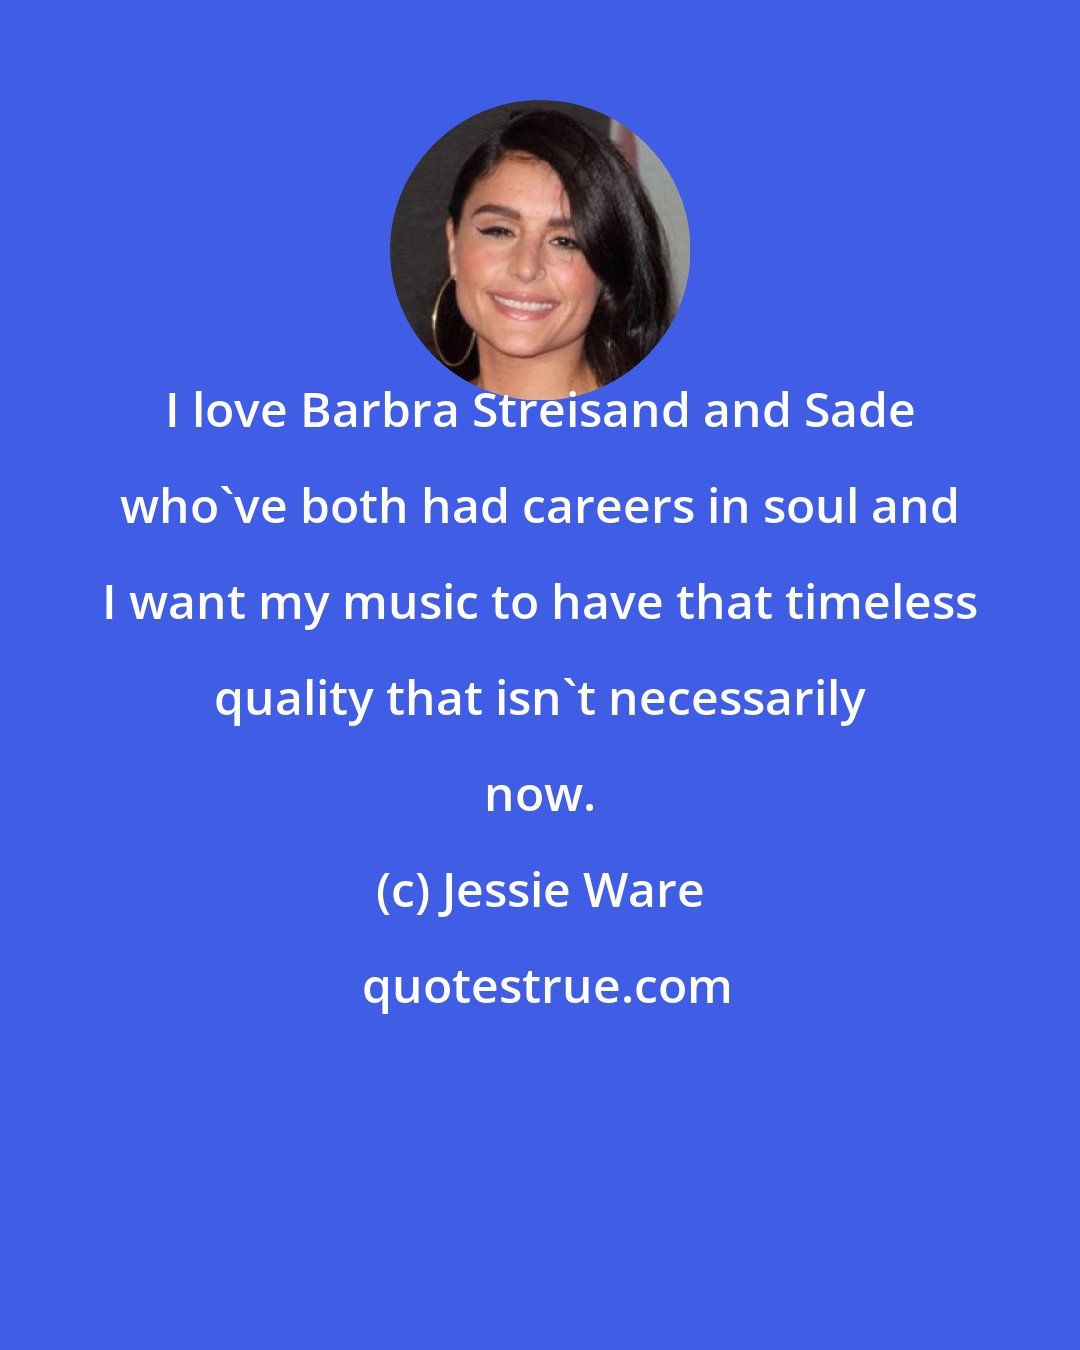 Jessie Ware: I love Barbra Streisand and Sade who've both had careers in soul and I want my music to have that timeless quality that isn't necessarily now.